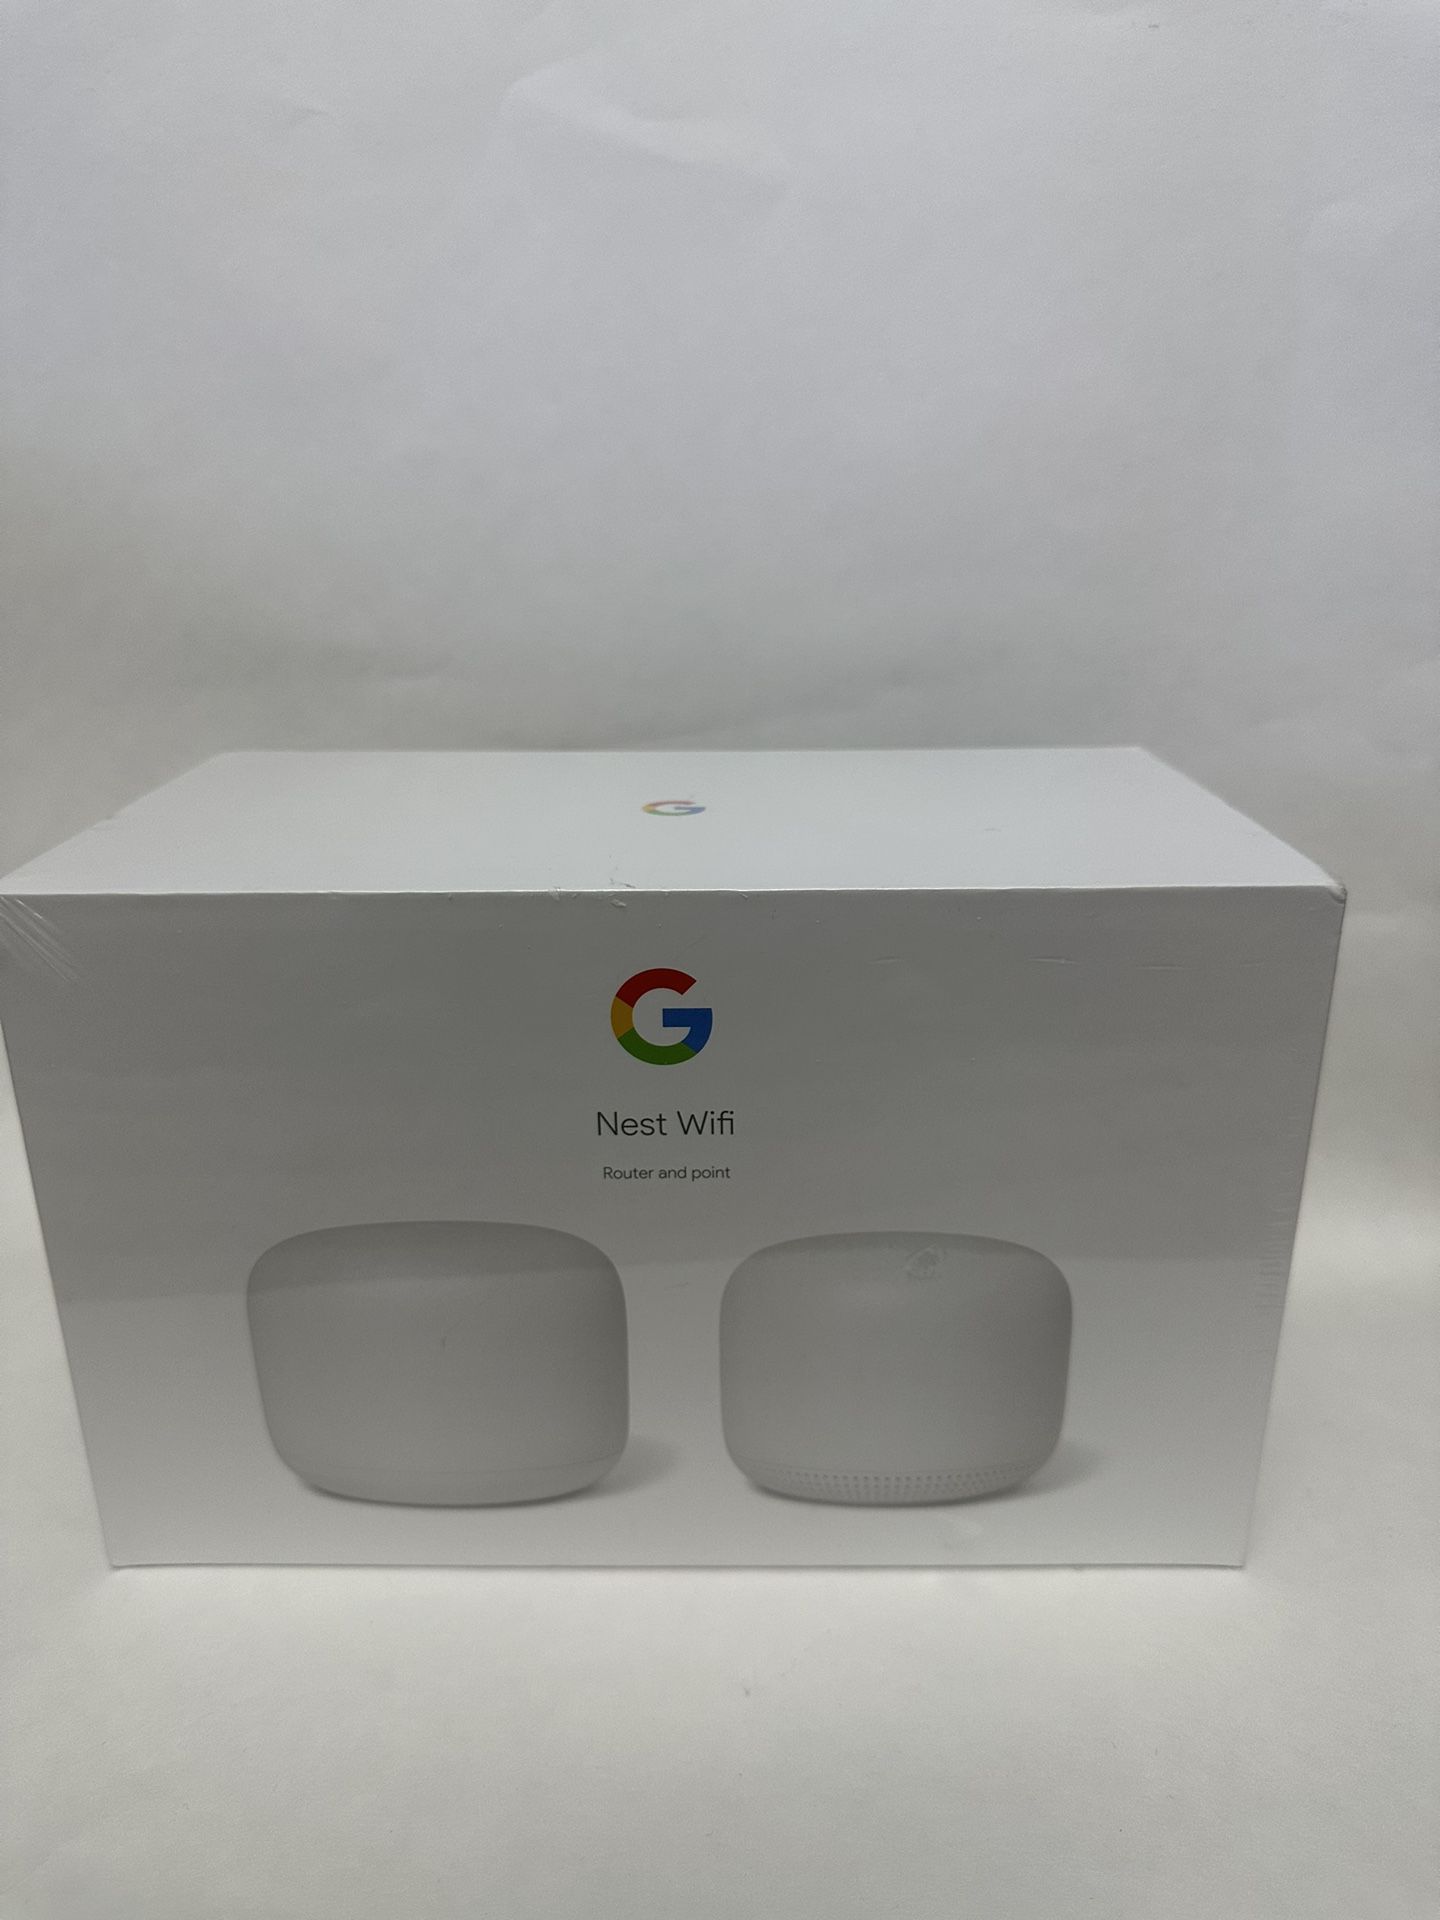  Google Nest Mesh Wifi Router and Point - Snow White GA00822-US SEALED